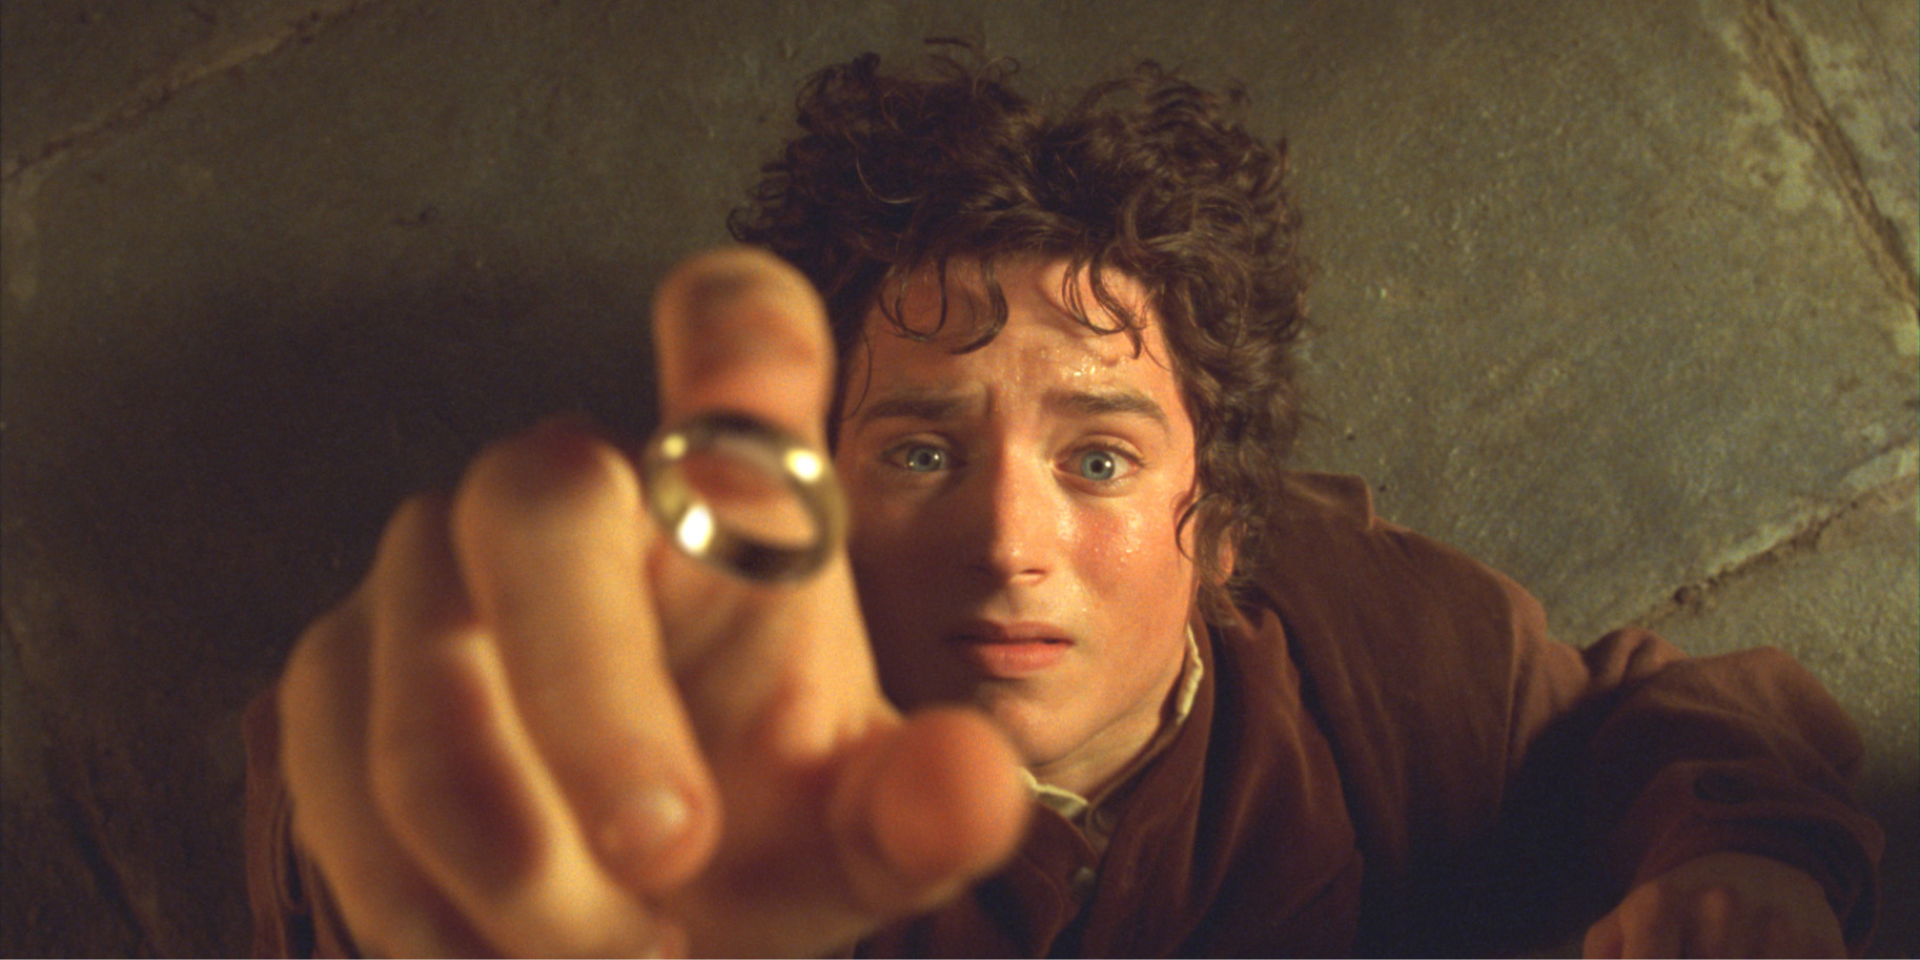 From Page To Screen - The Lord Of The Rings: The Fellowship Of The Ring